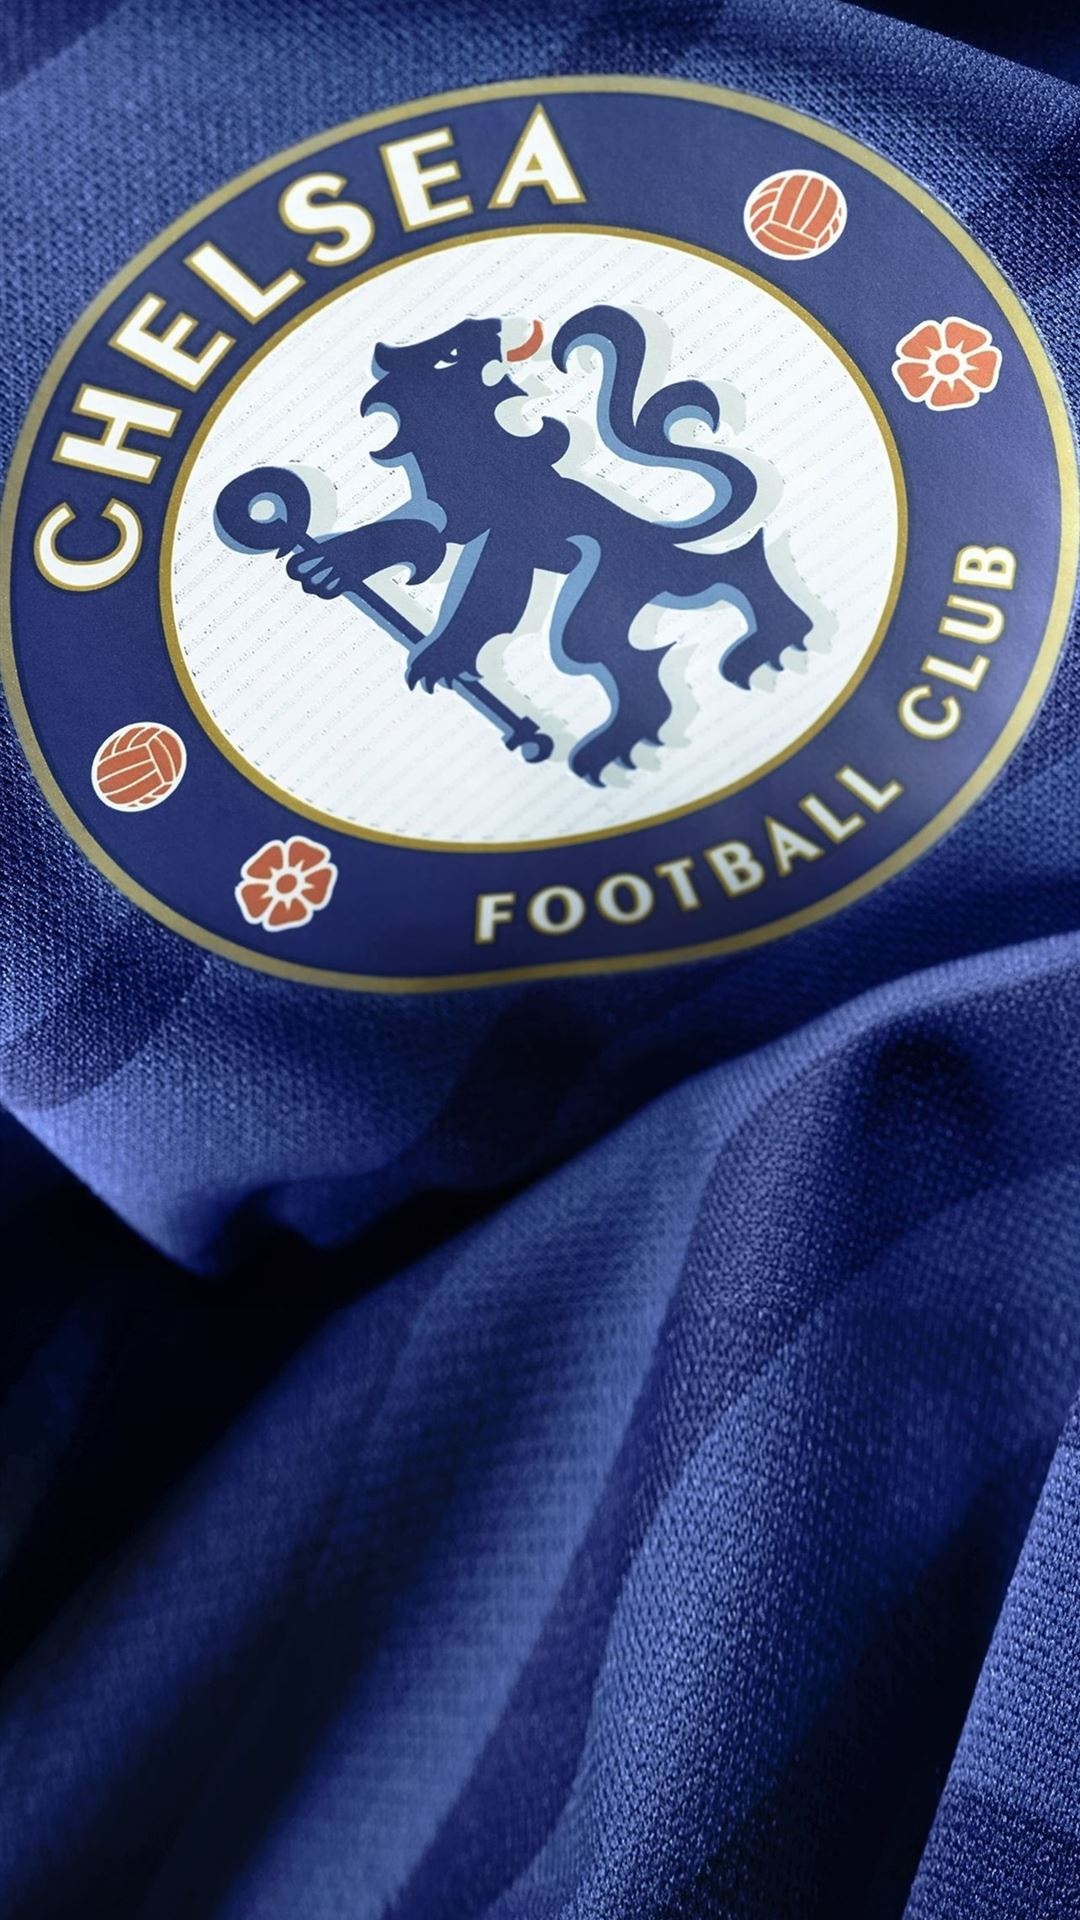 Chelsea: The Pensioners, A century of rich sporting heritage. 1080x1920 Full HD Wallpaper.